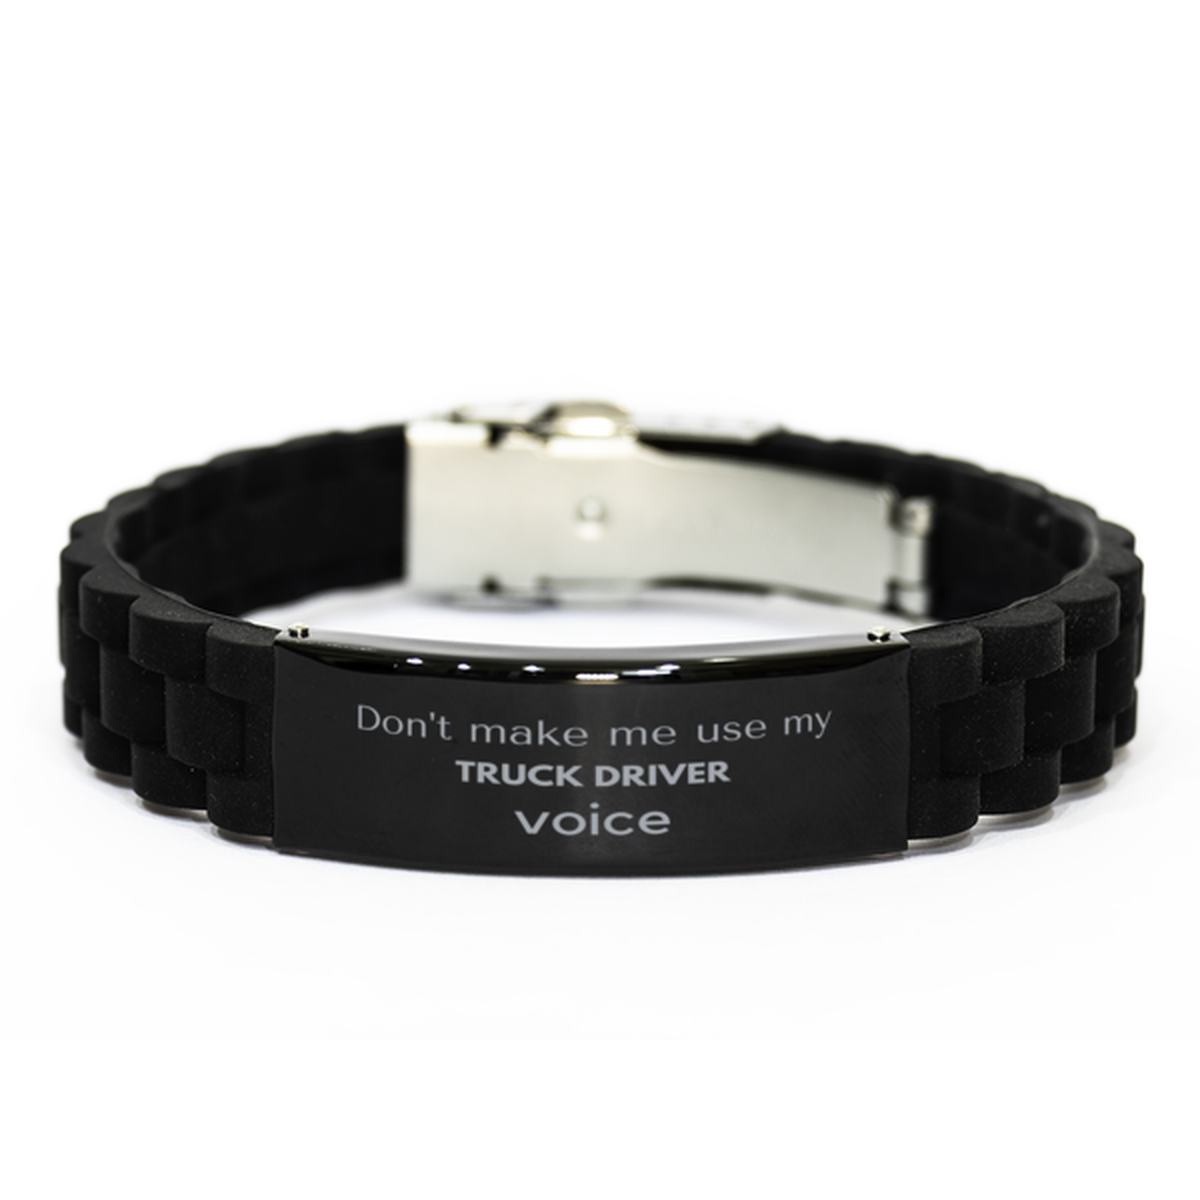 Don't make me use my Truck Driver voice, Sarcasm Truck Driver Gifts, Christmas Truck Driver Black Glidelock Clasp Bracelet Birthday Unique Gifts For Truck Driver Coworkers, Men, Women, Colleague, Friends